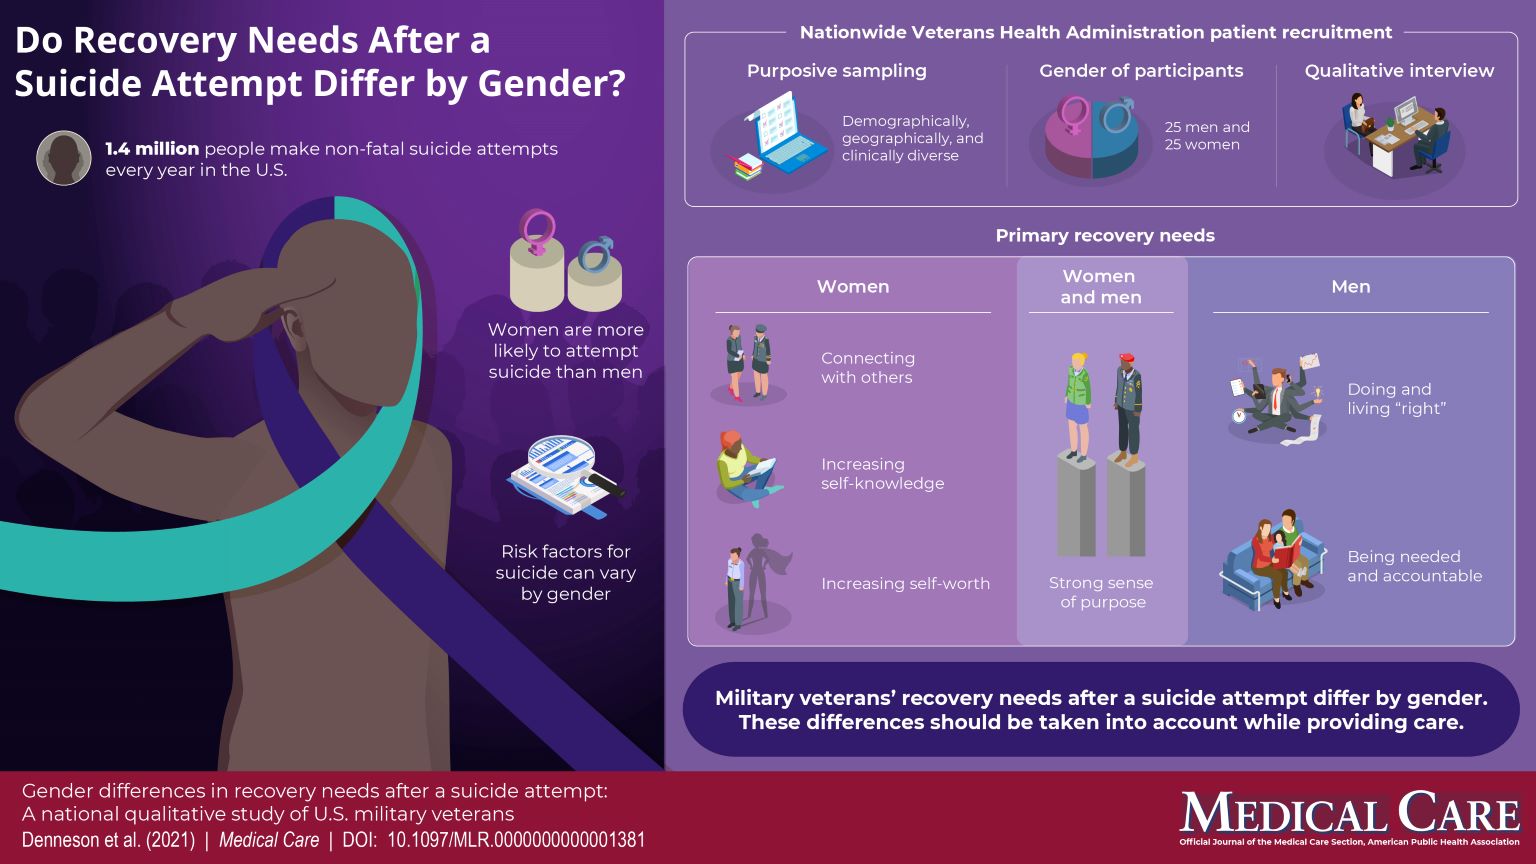 Infographic on the recovery needs of veterans by gender following suicide attempt